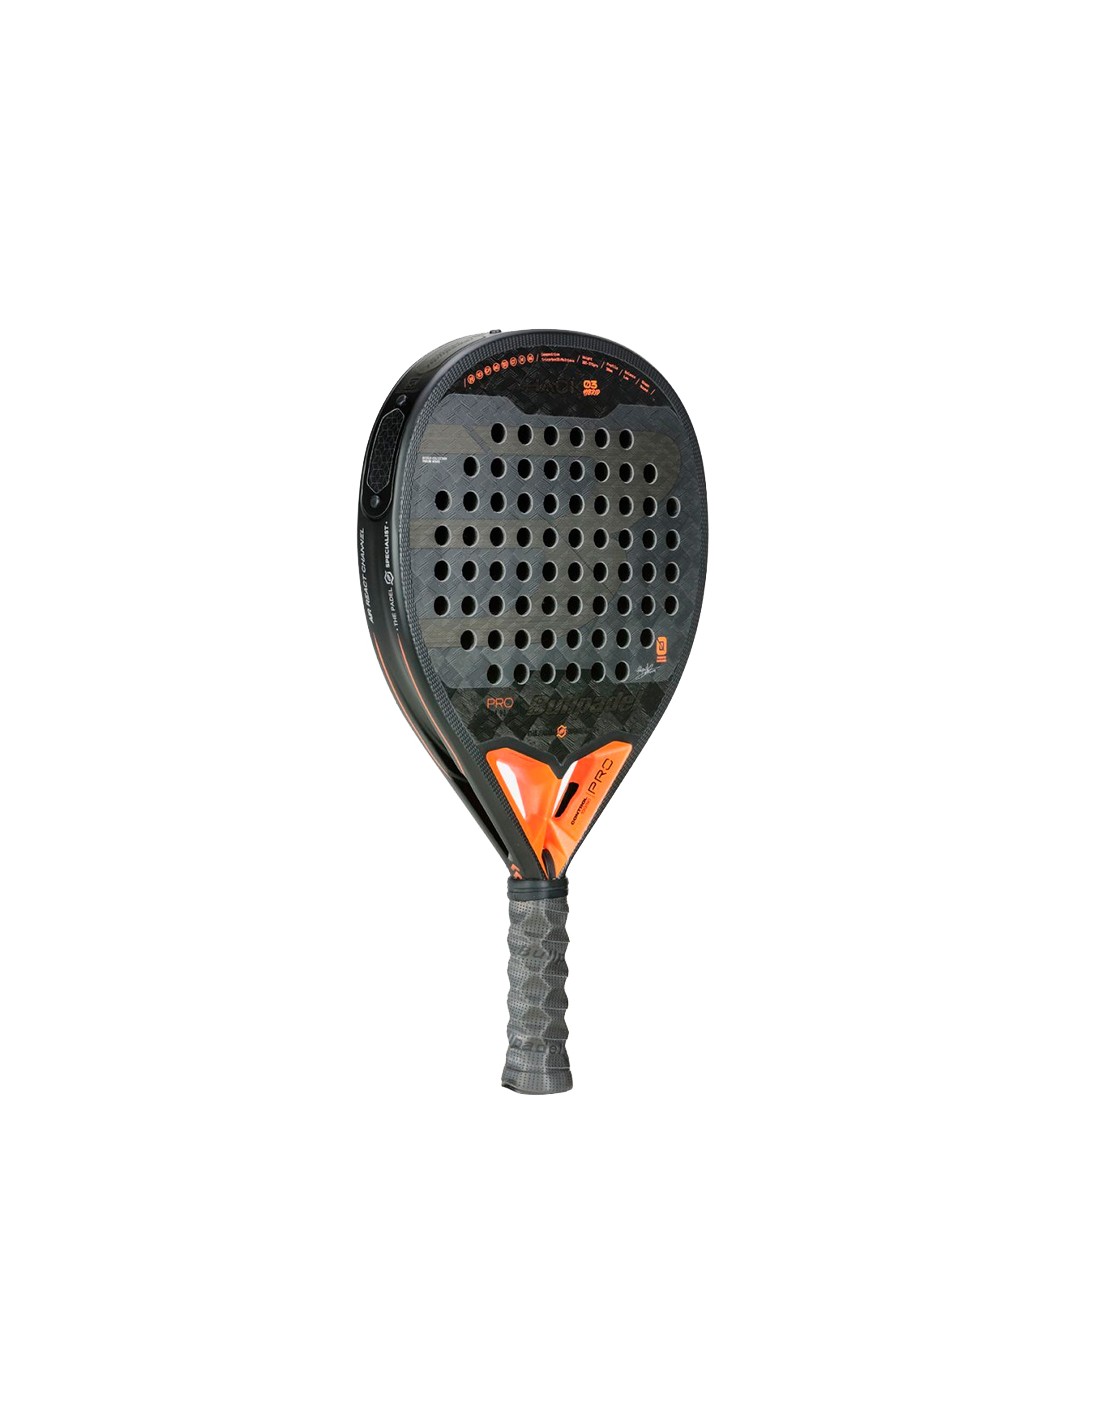 The Hesacore grip: A great innovation signed Bullpadel